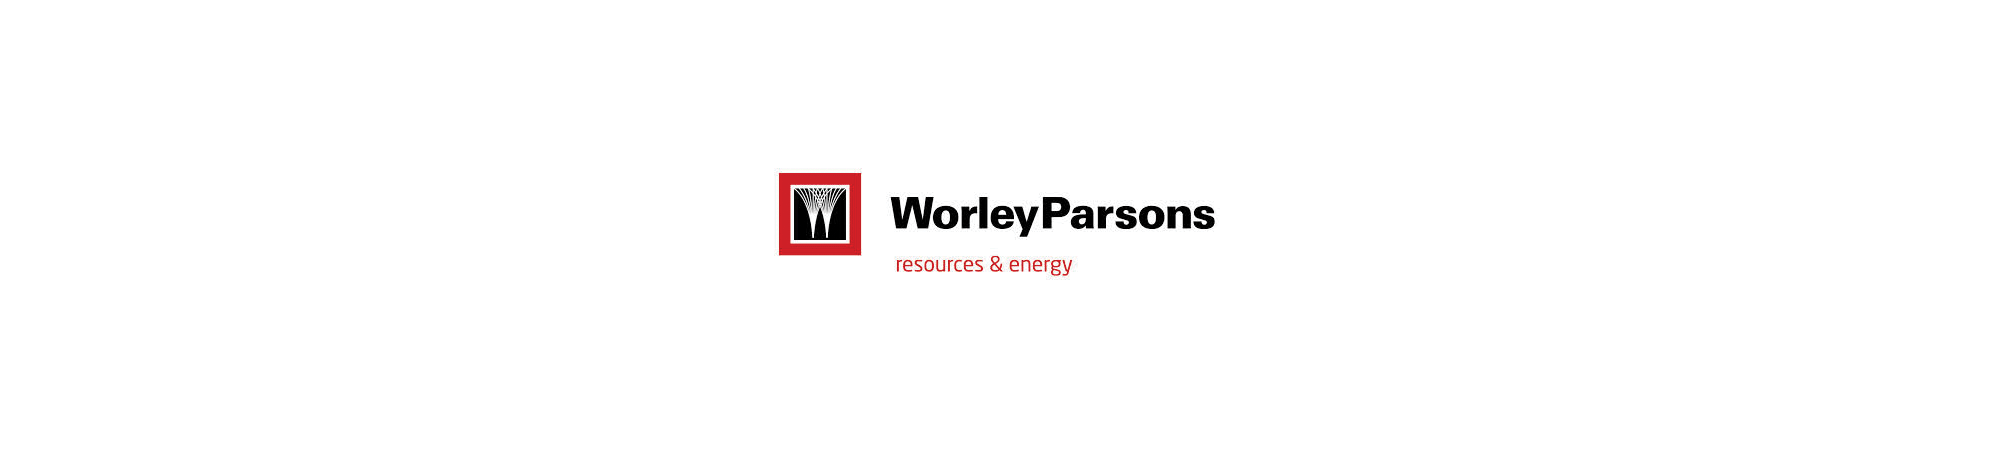 worleyparsons.png